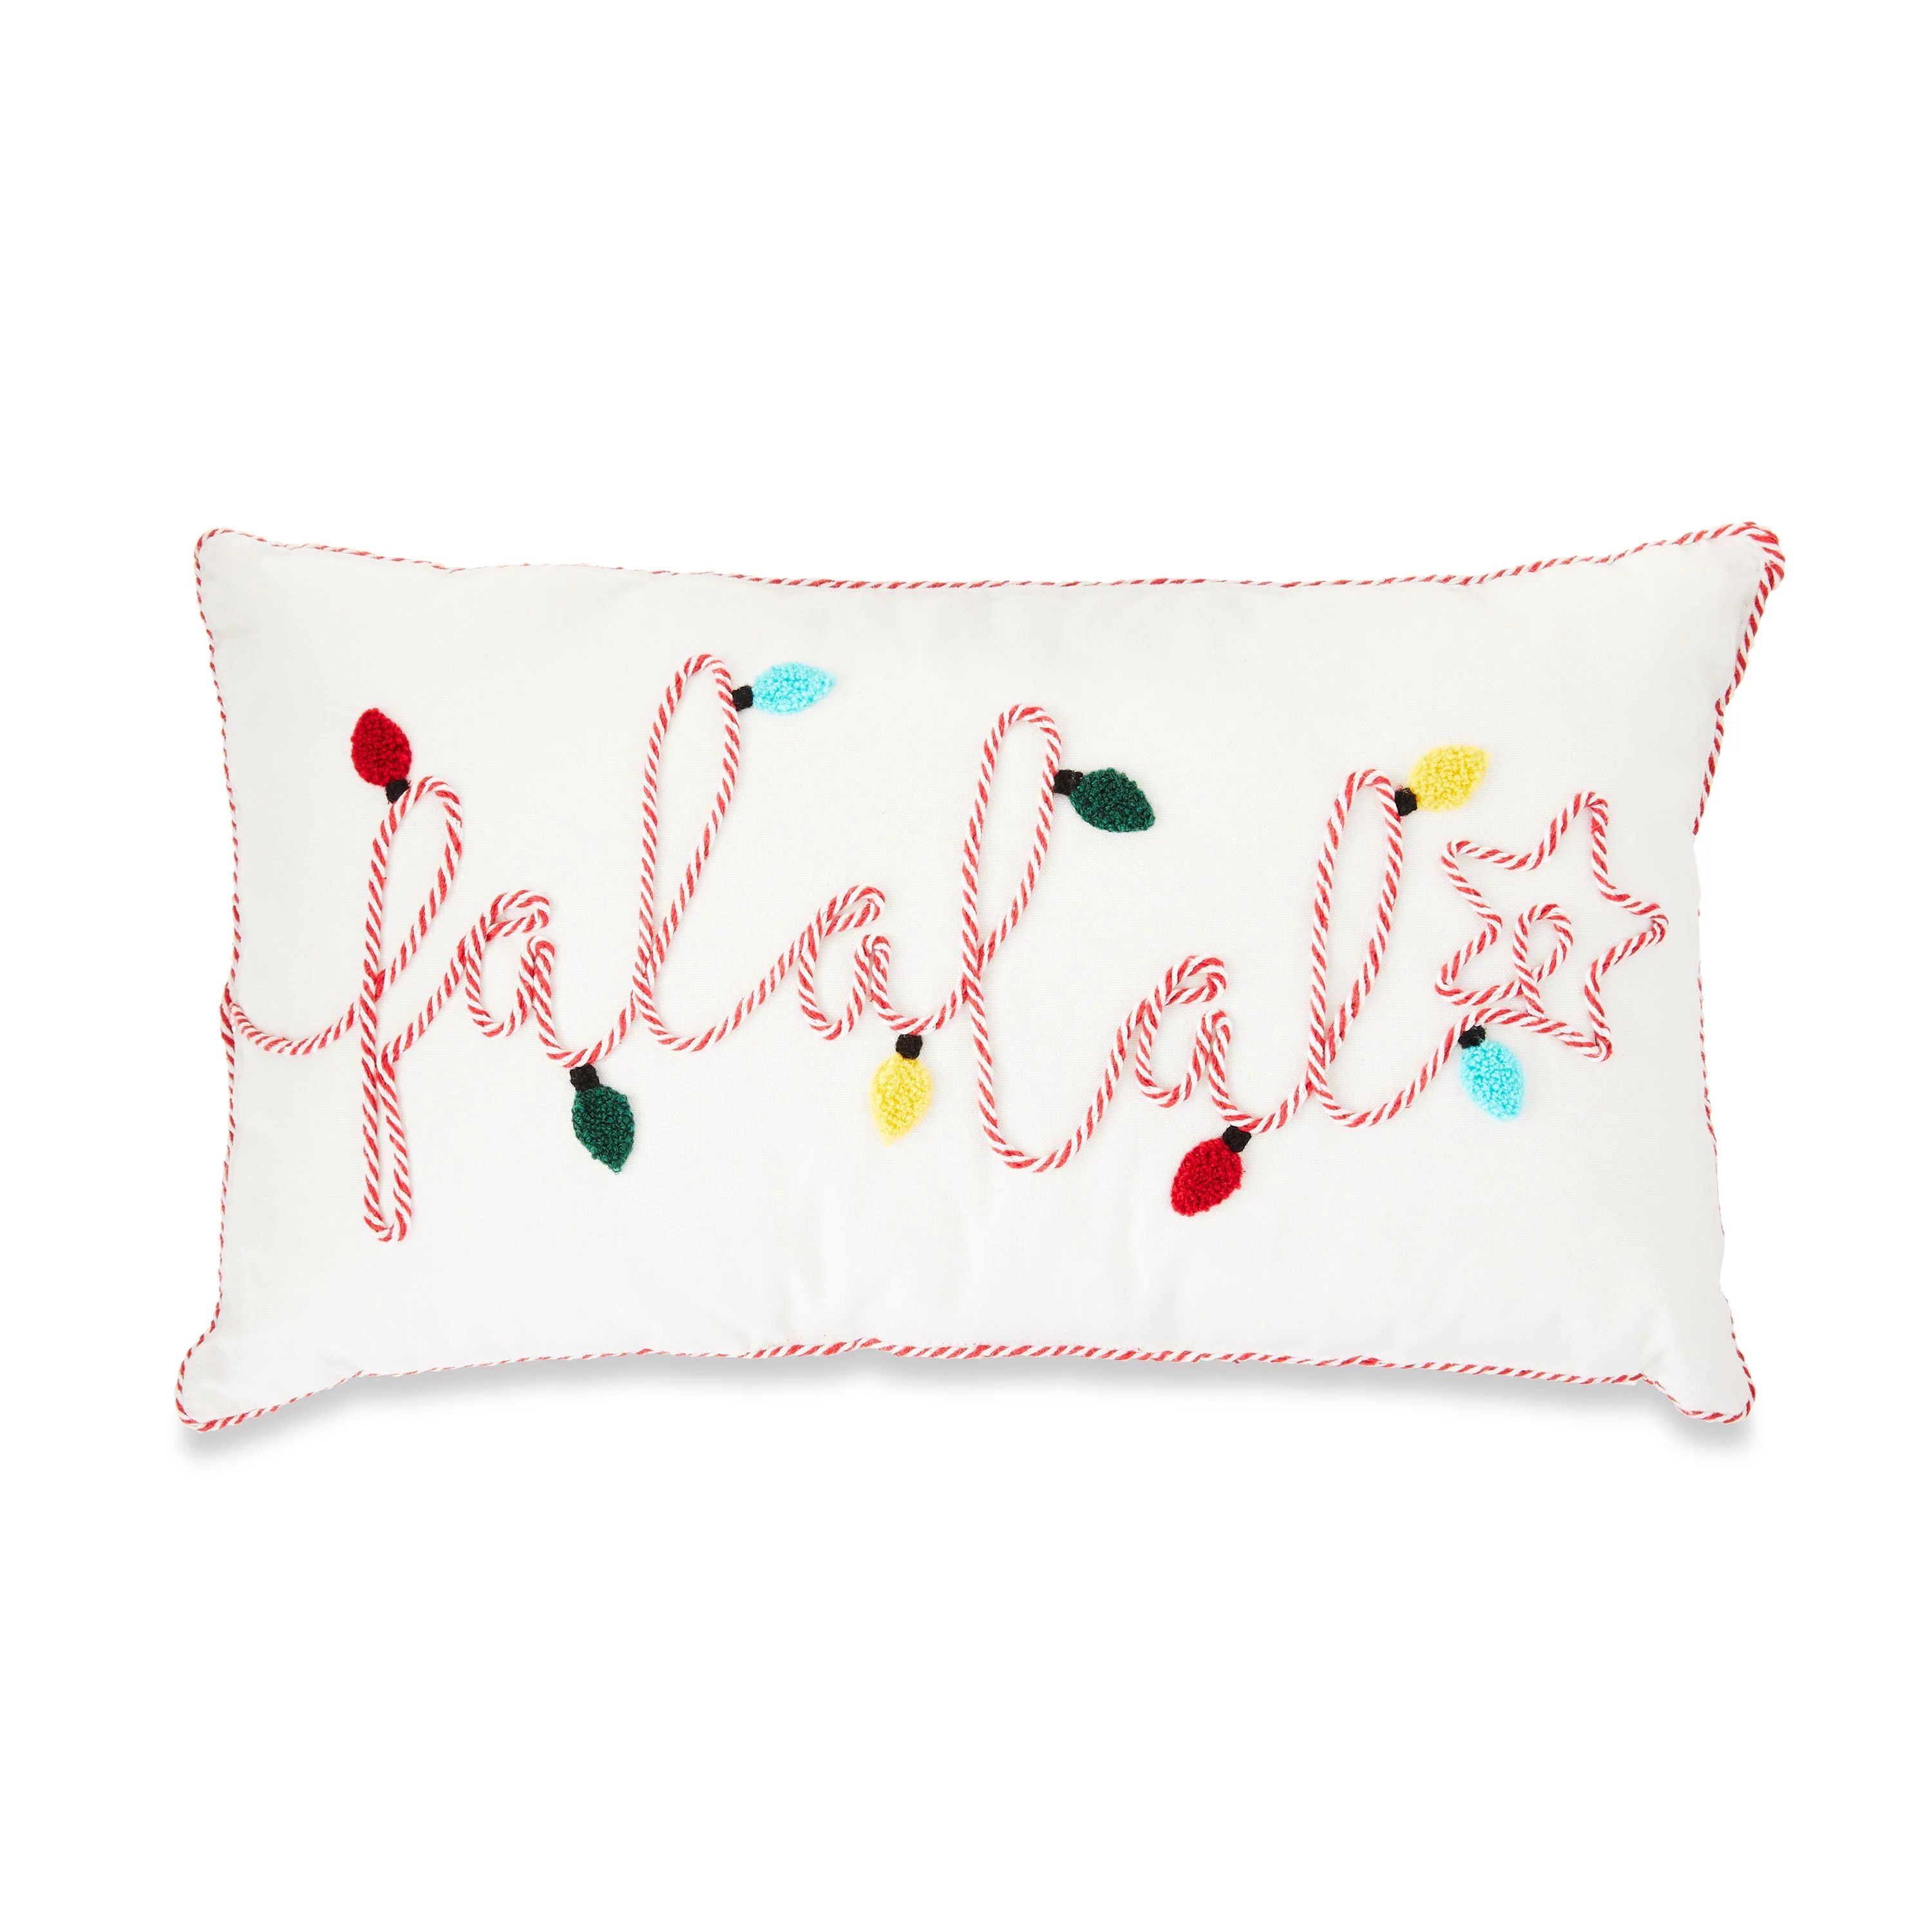 Falala Lumbar Christmas Decorative Pillow, 18 in x 10 in, by Holiday Time | Walmart (US)